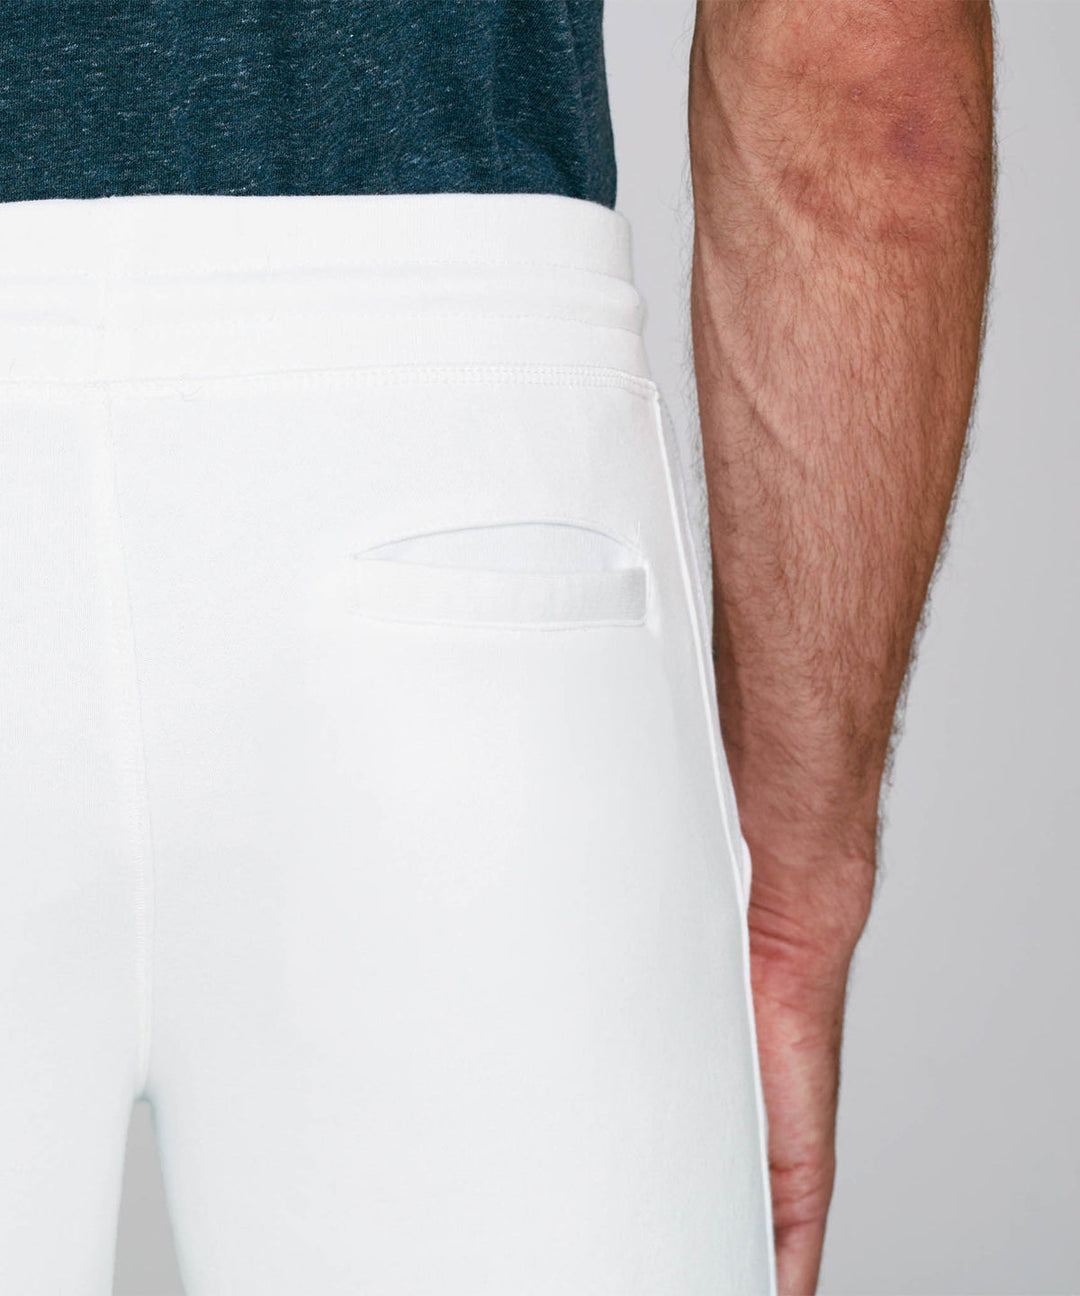 Apres Surf + Sail Chilly Joggers & Shorts Apres Surf + Sail Chilly Bottoms Ralawise Xsmall White Shorts